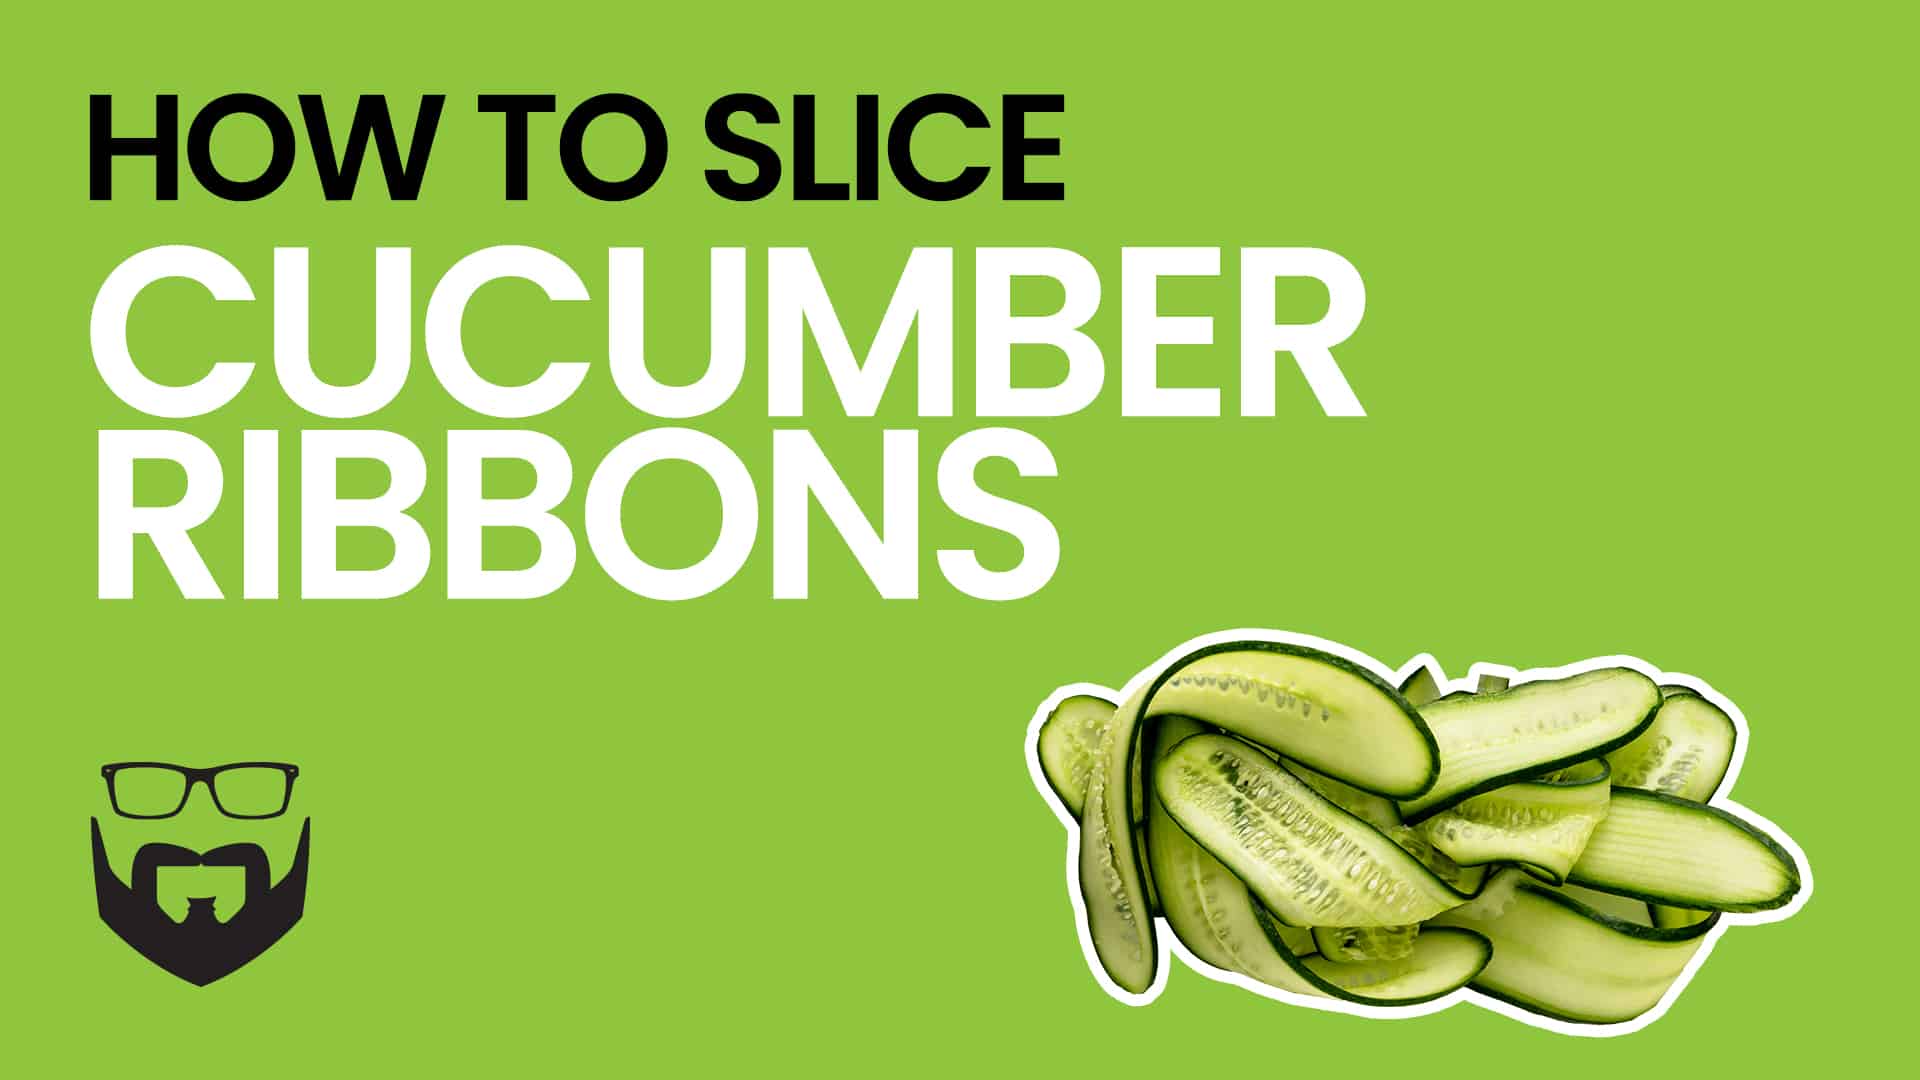 How to Slice Cucumbers into Ribbons Video - Green